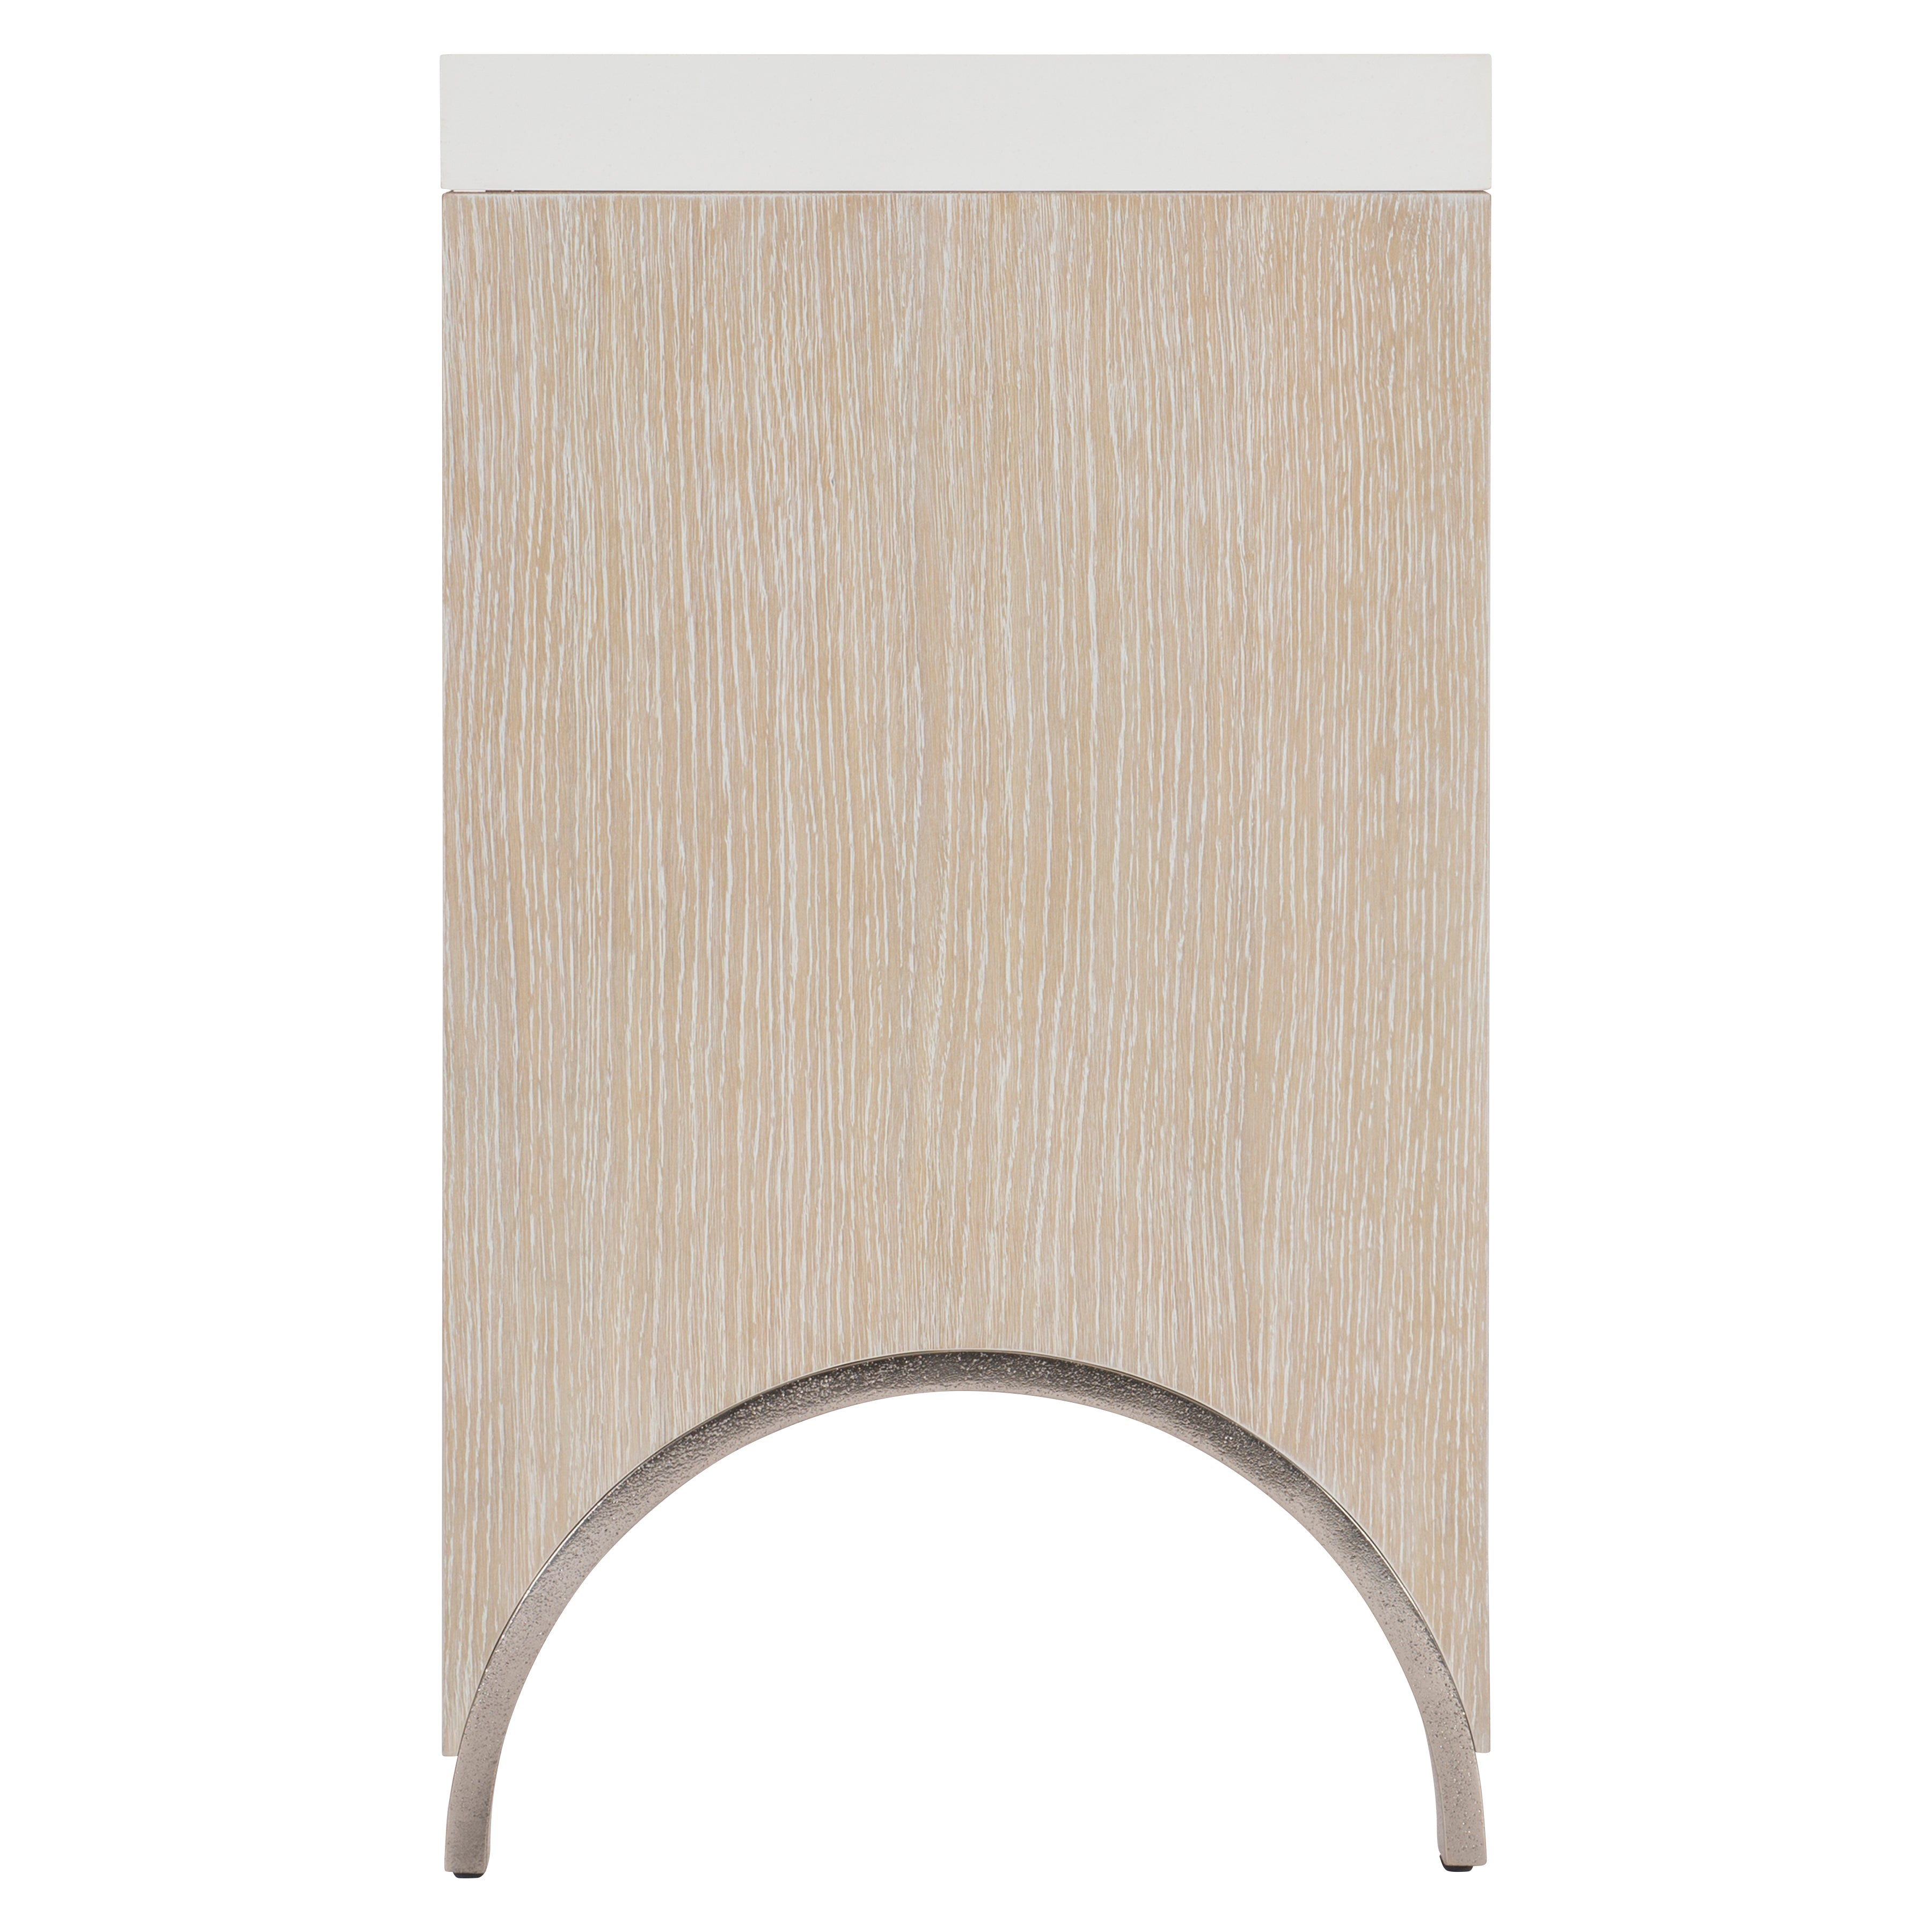 Solaria Table with Arched End Panels